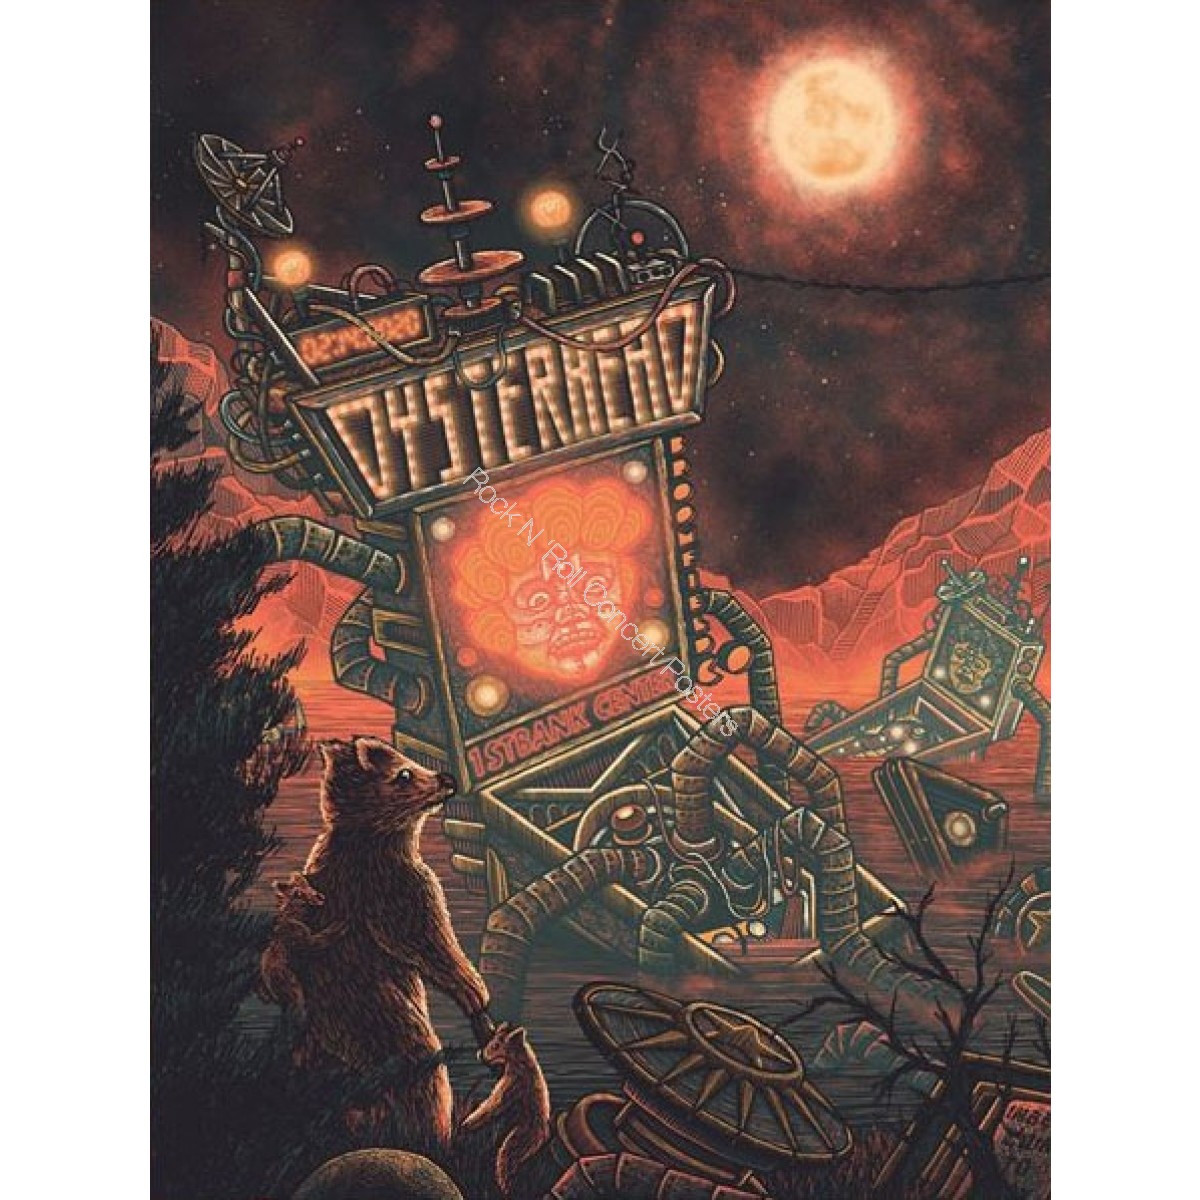 Oysterhead 1STBANK Center Broomfield | - Colorado S/N Oysterhead edition - Concert Concert of | Poster For Posters Silkscreen Posters Official 2/14/20 RRCP 500 Concert Sale